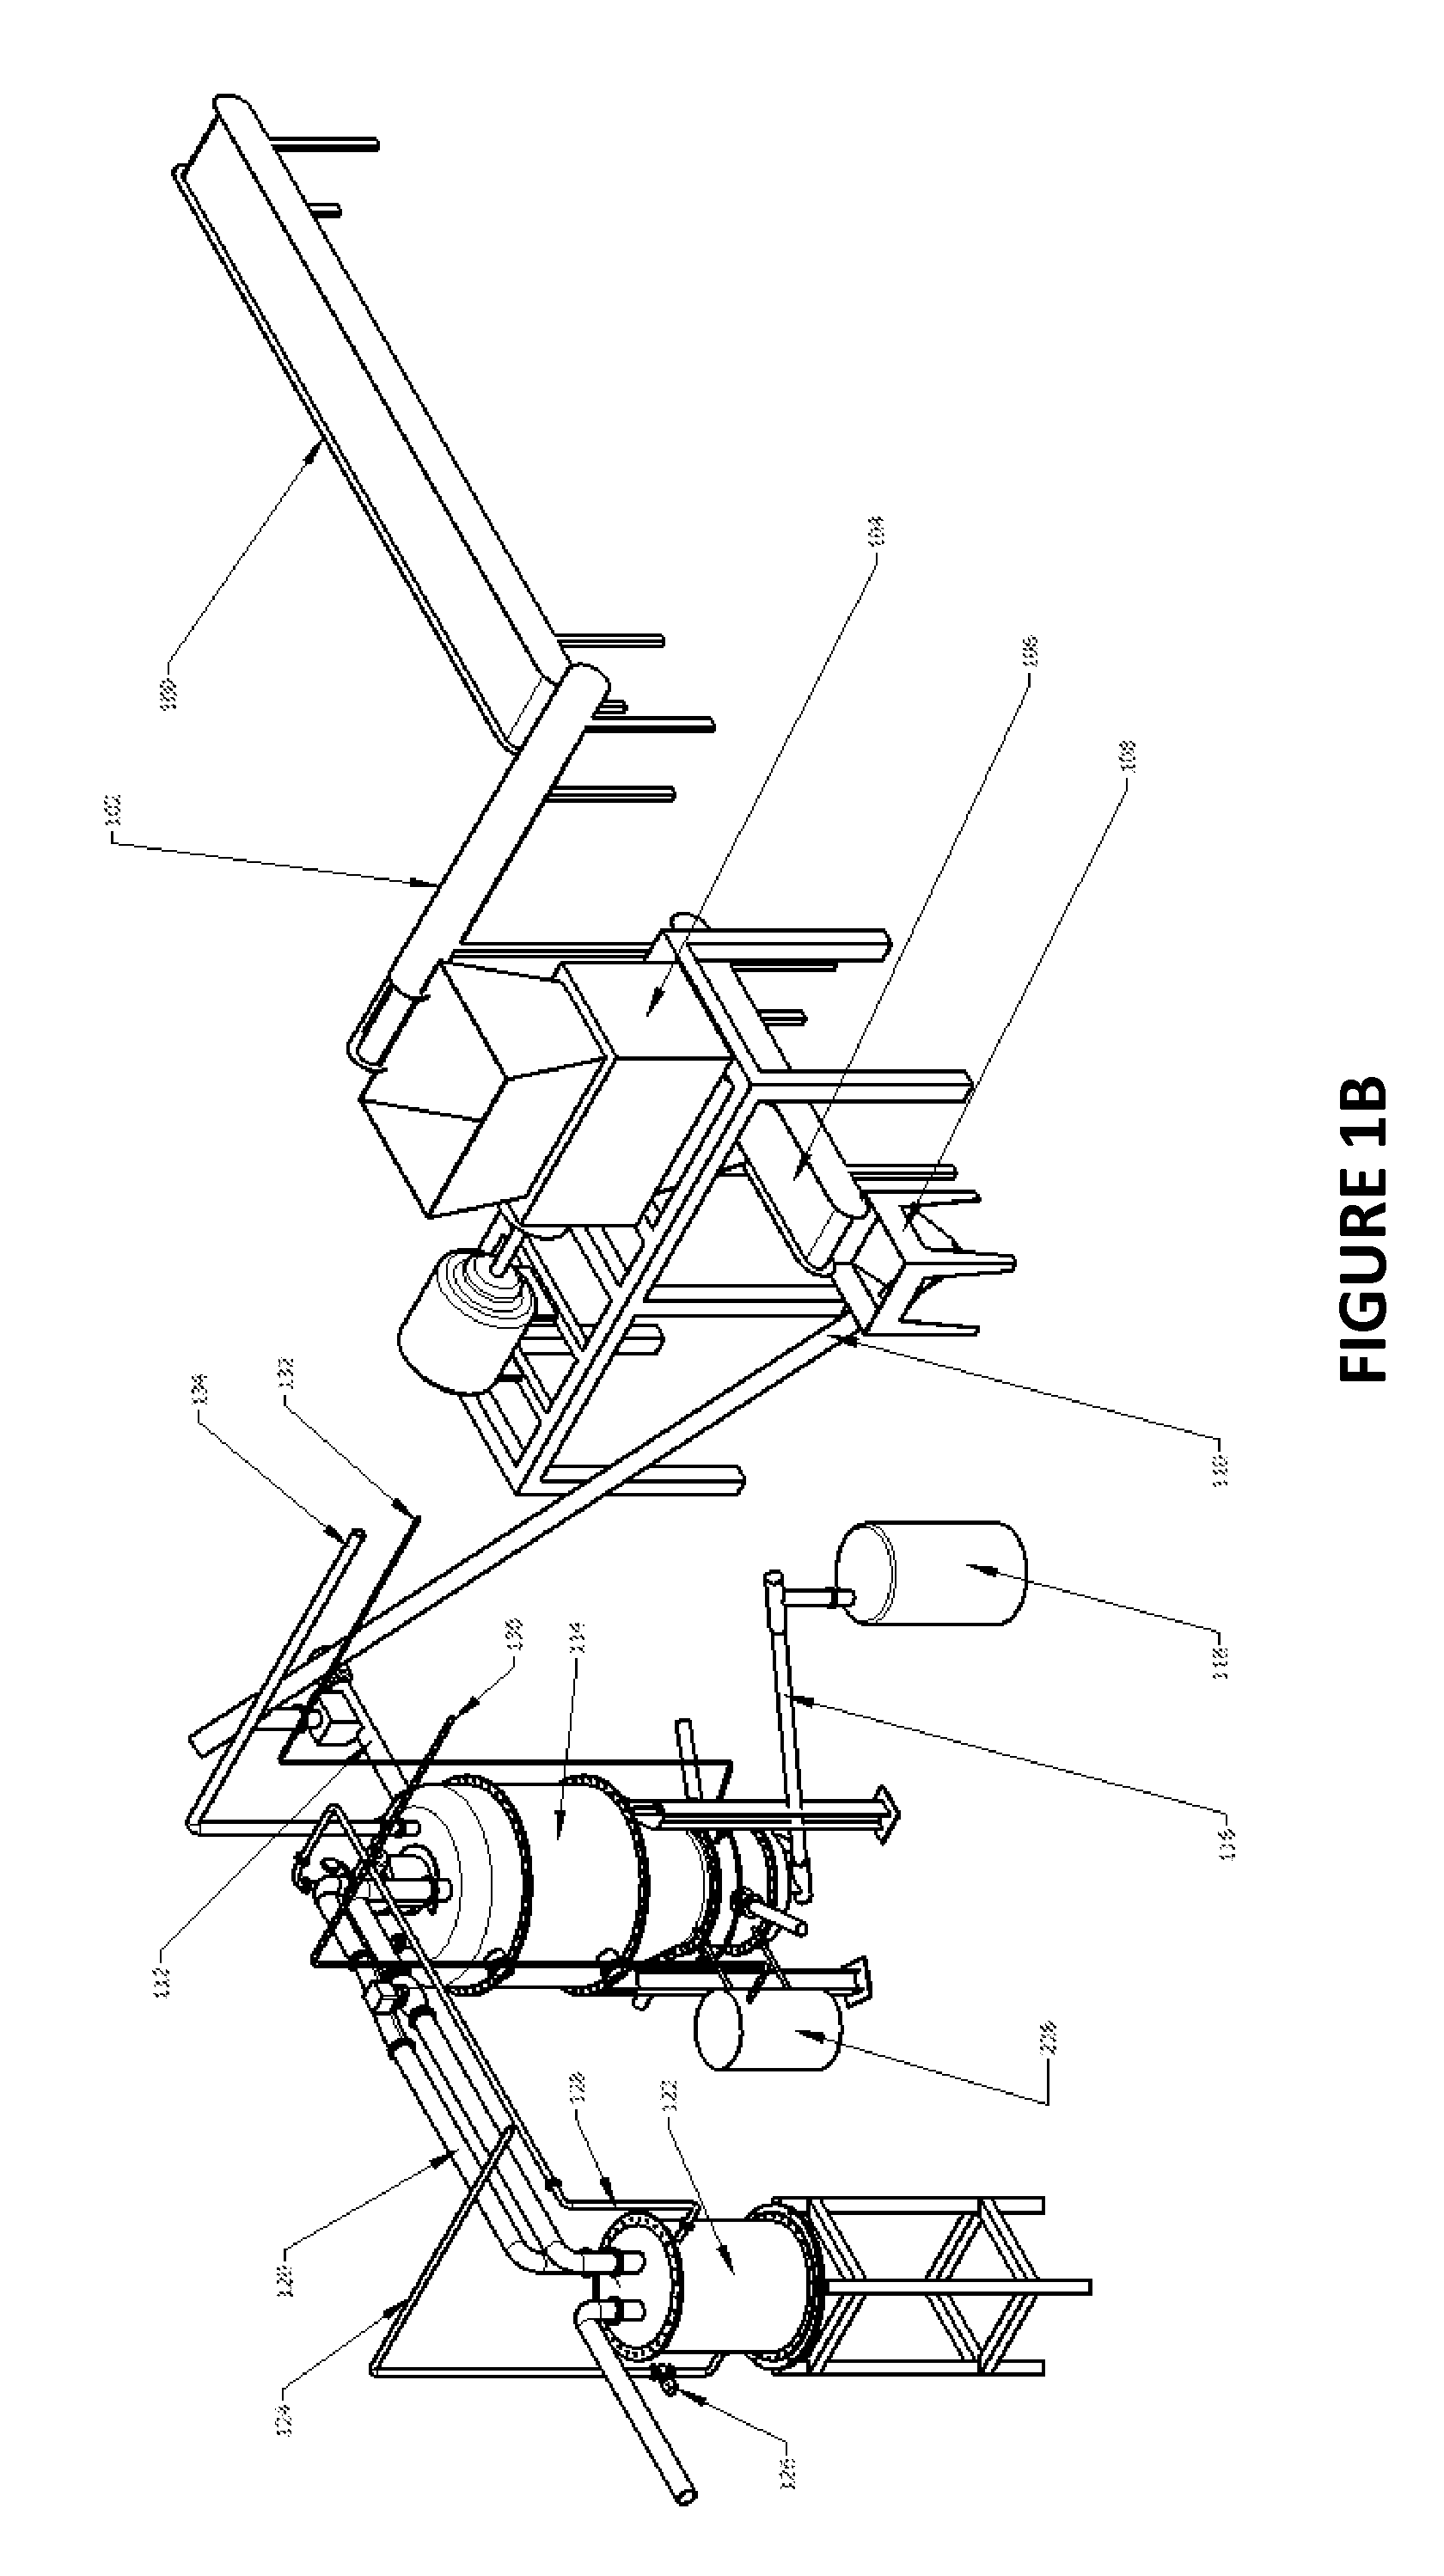 System and method for processing material to generate syngas using plurality of gas removal locations